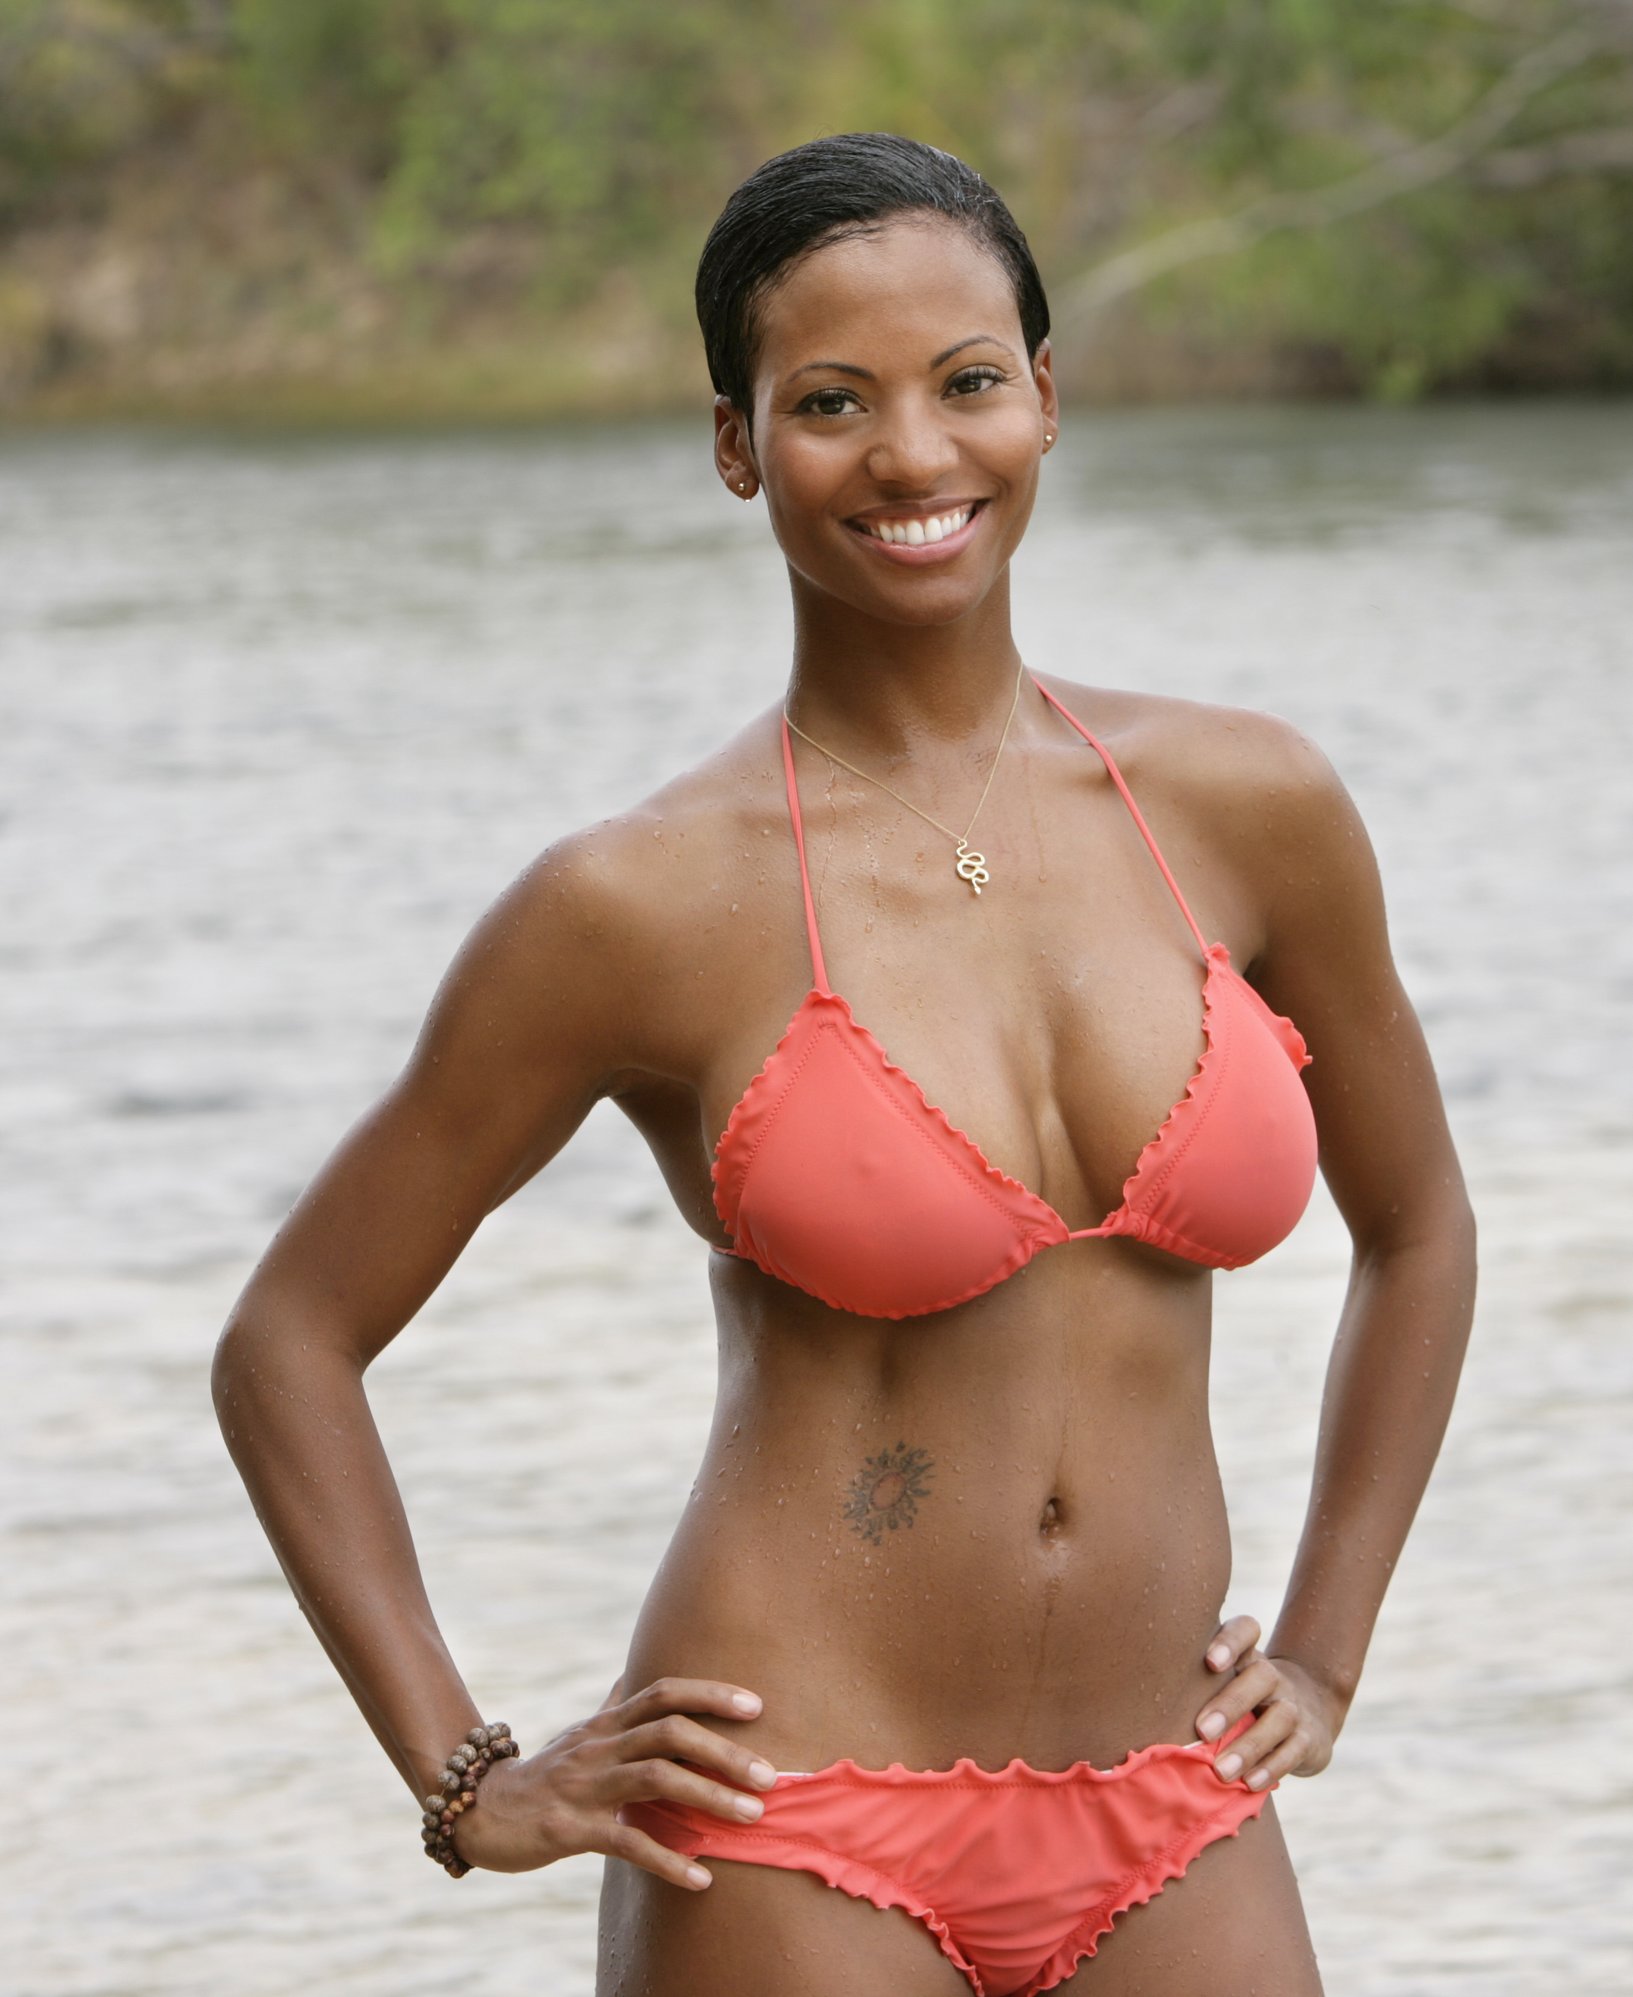 Candace Smith Survivor: Candace Smith Topless